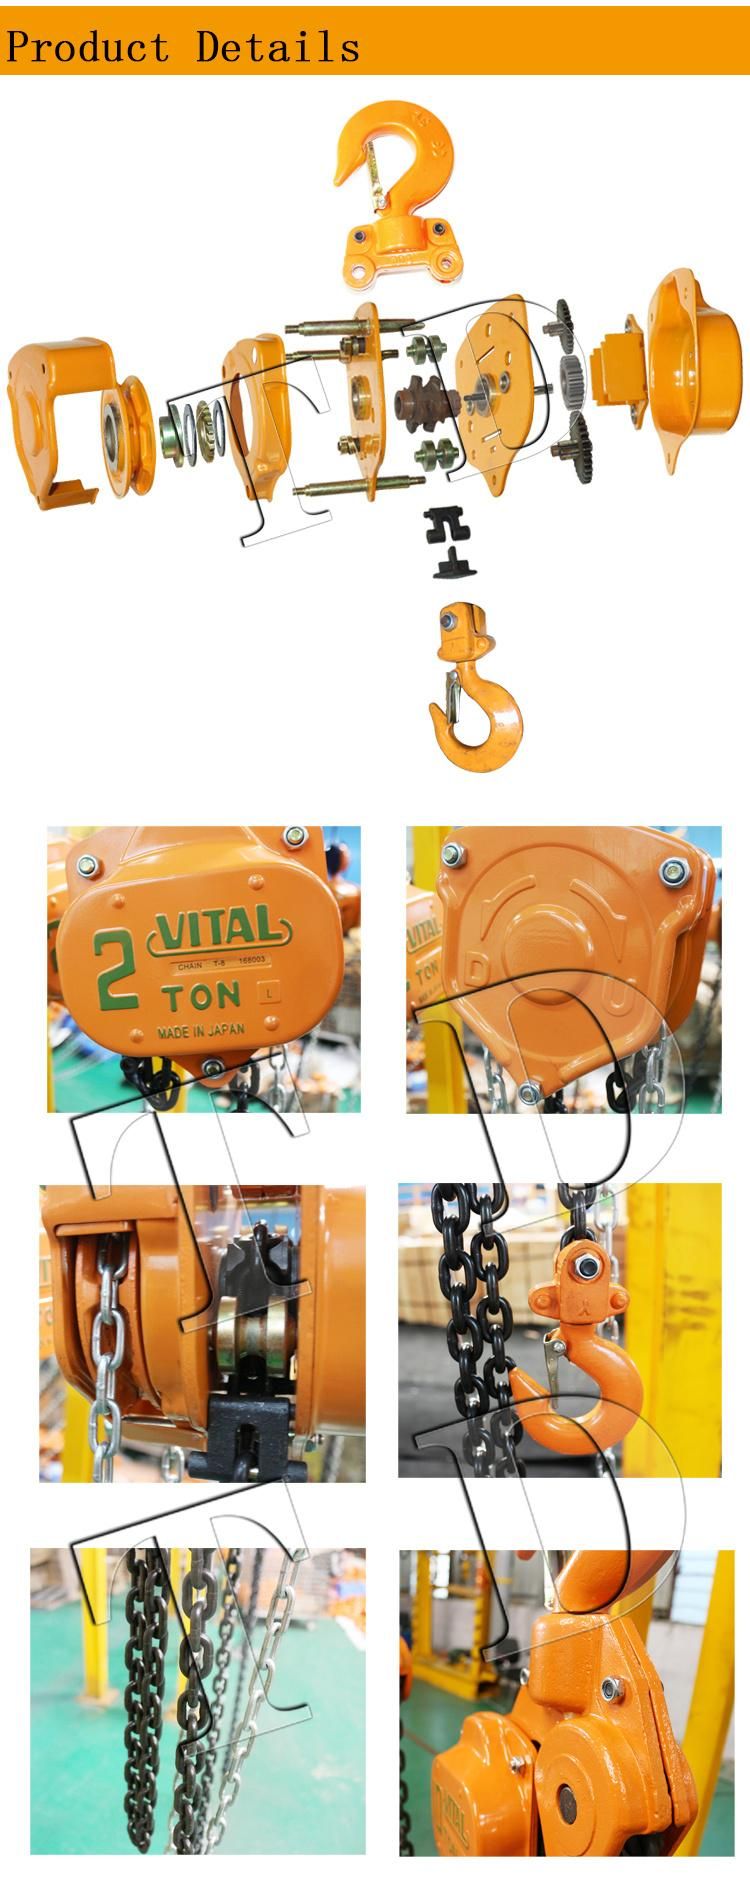 Chain Hoist Lifting Block 1ton to 5ton Vt High Quality with G80 Chain Hot Selling